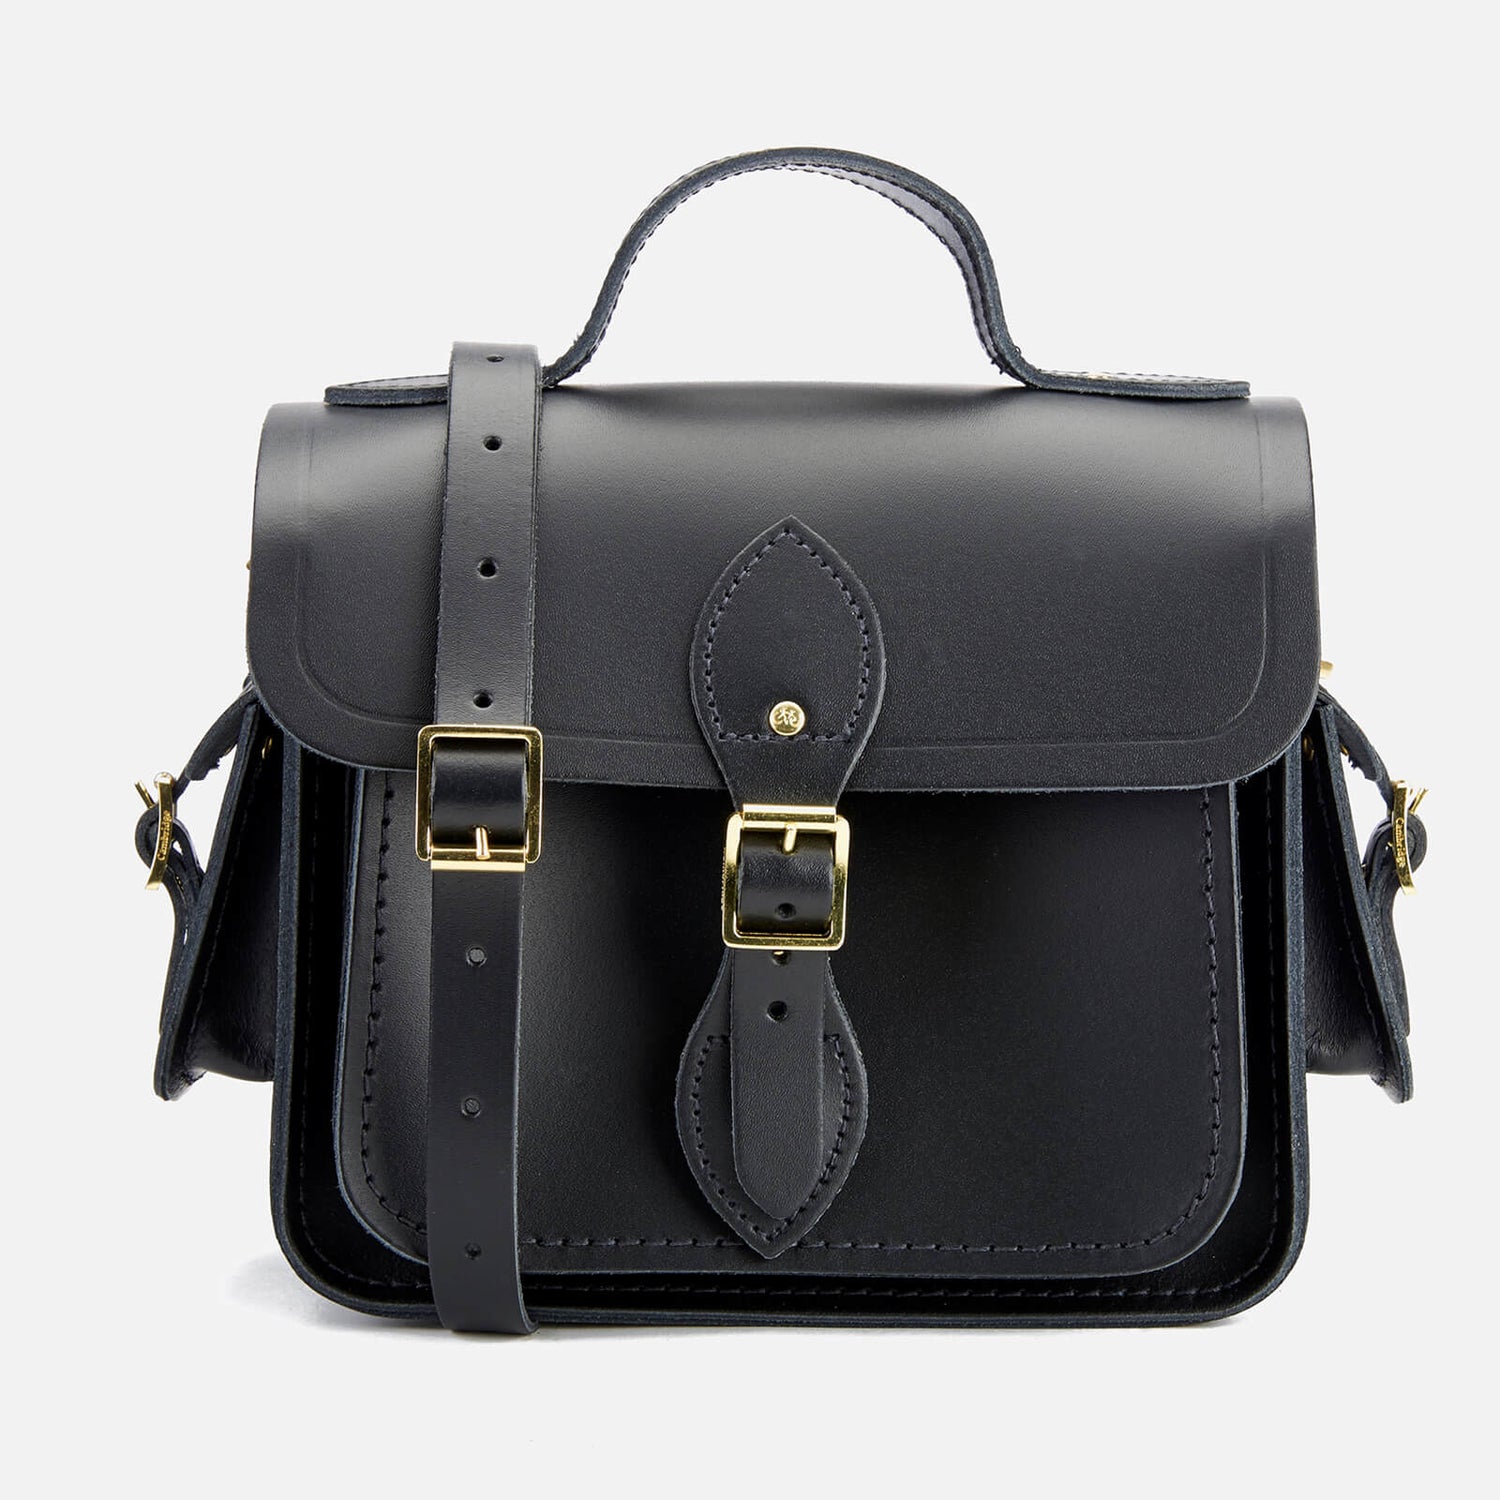 The Cambridge Satchel Company Women's Traveller Bag with Side Pockets ...